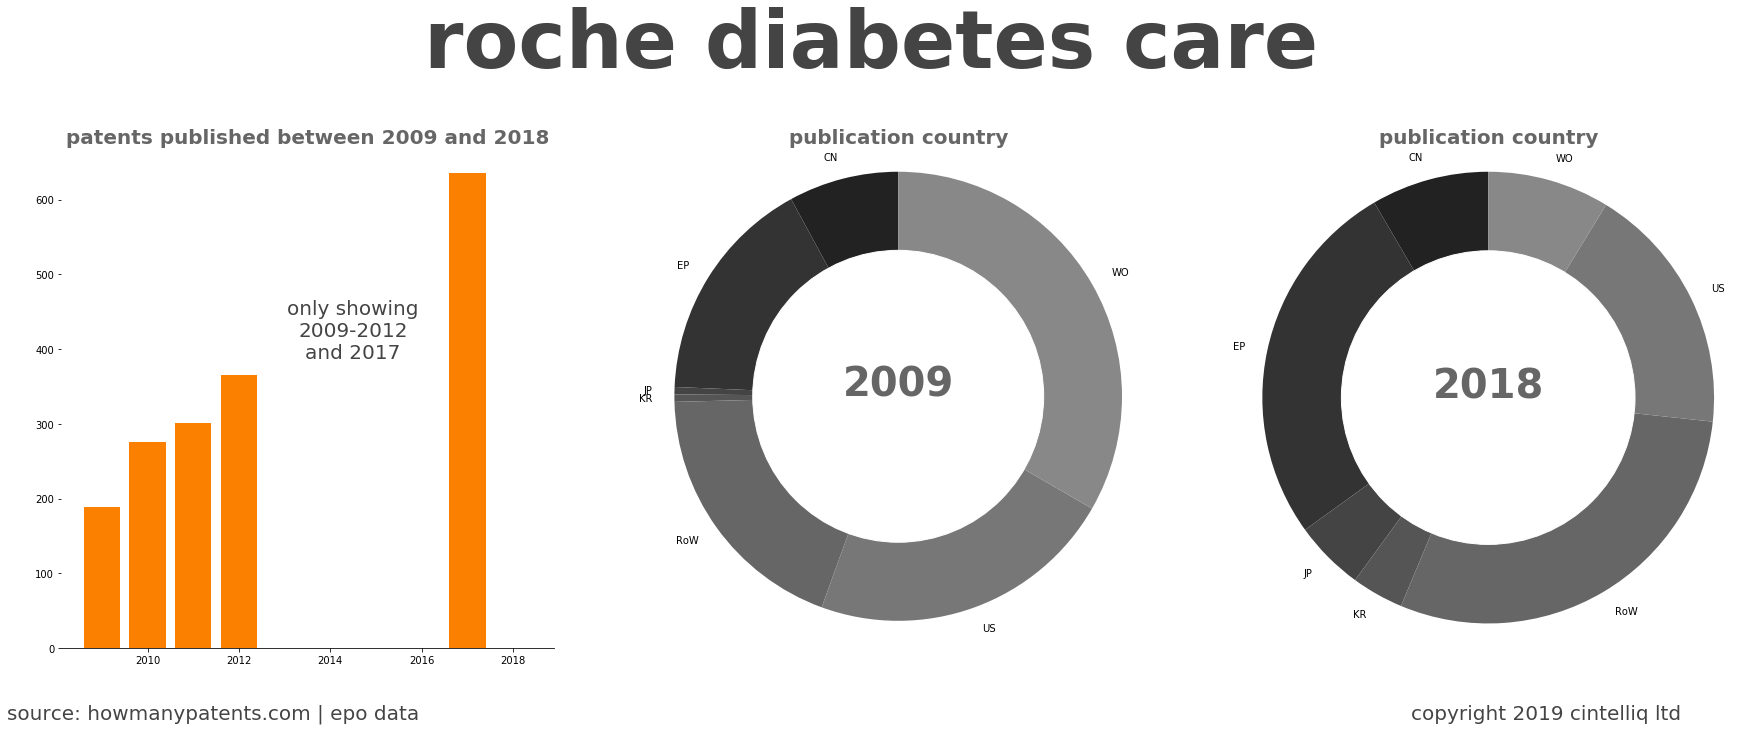 summary of patents for Roche Diabetes Care